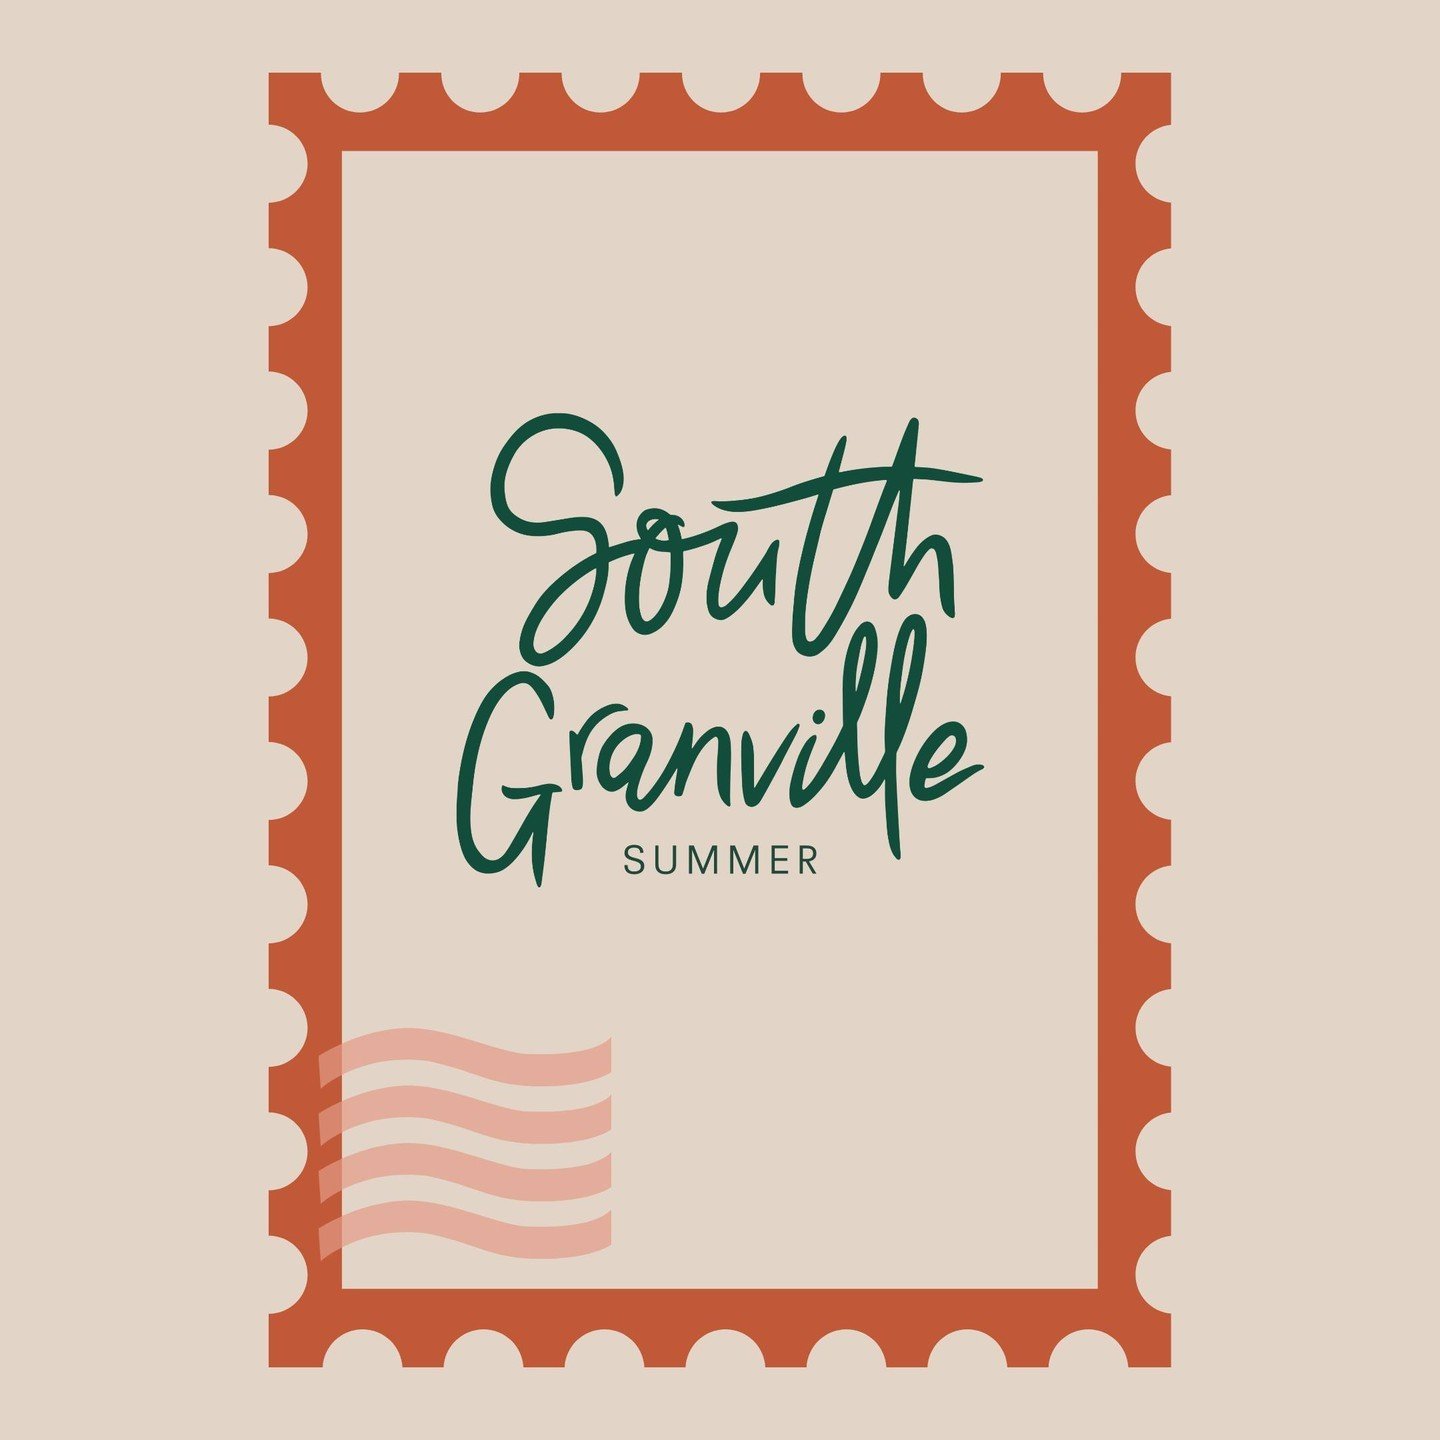 ⁠A Very South Granville Summer! 🍋💌⁠
⁠
We're thrilled to spend this summer with you, so we've curated a lineup of unforgettable events, just for you! 💕⁠
⁠
...and it starts TOMORROW with ⁠
⁠
🌳 a Bonsai exhibit with the BC Bonsai Society ⁠
🗓️ Sunda